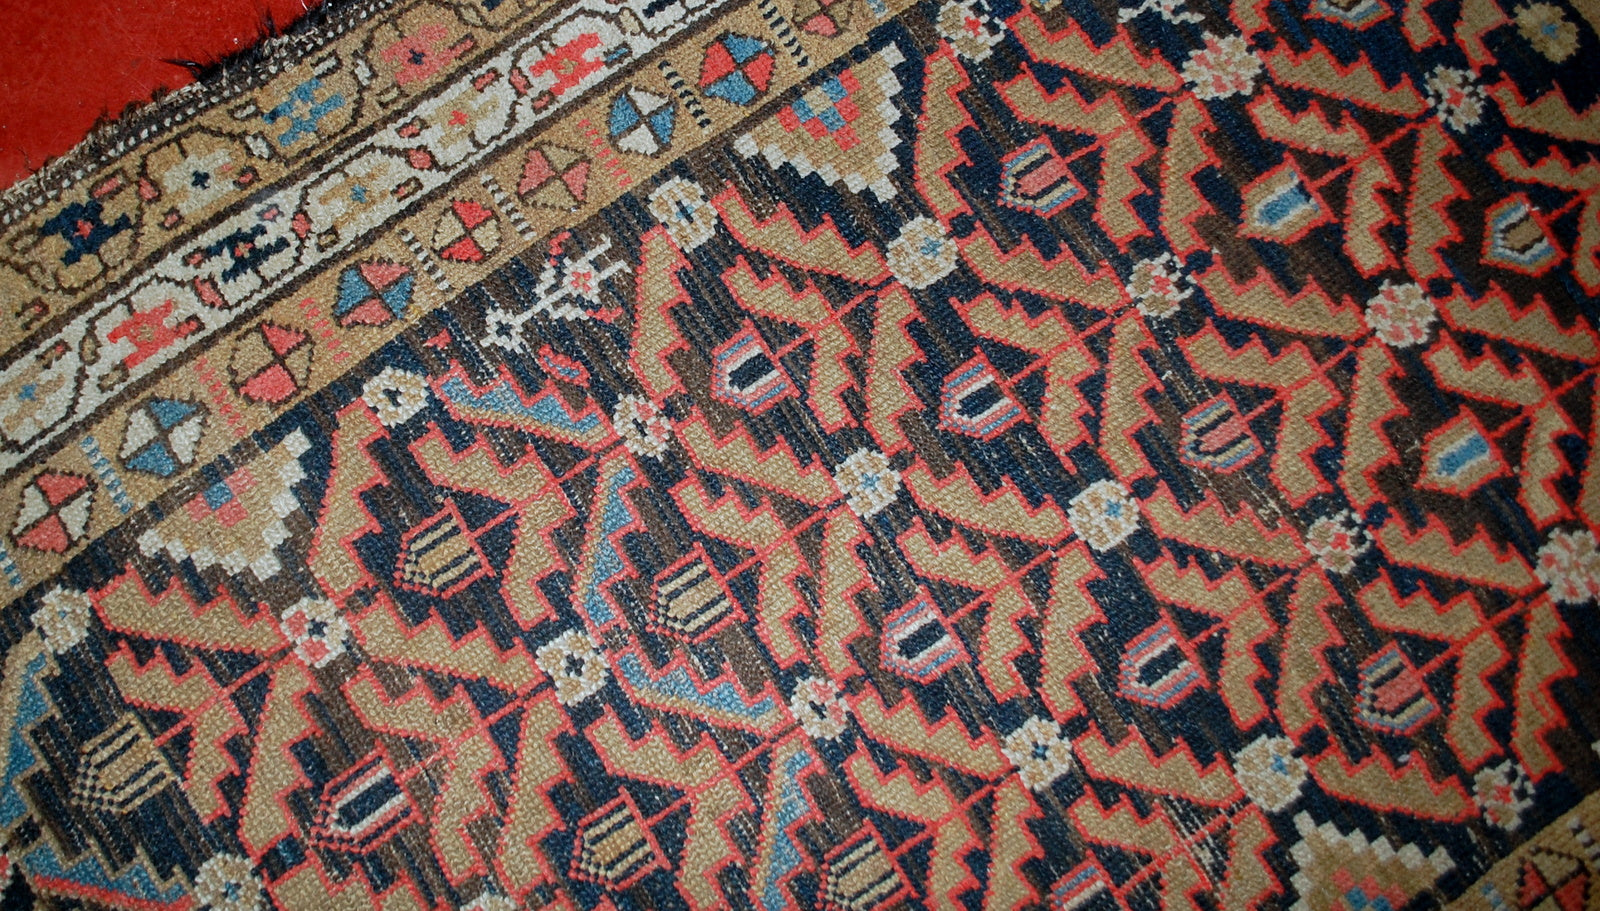 Antique Persian Hamadan rug in original condition, it has some low pile. The rug is from the Middle East region made in the beginning of 20th century.